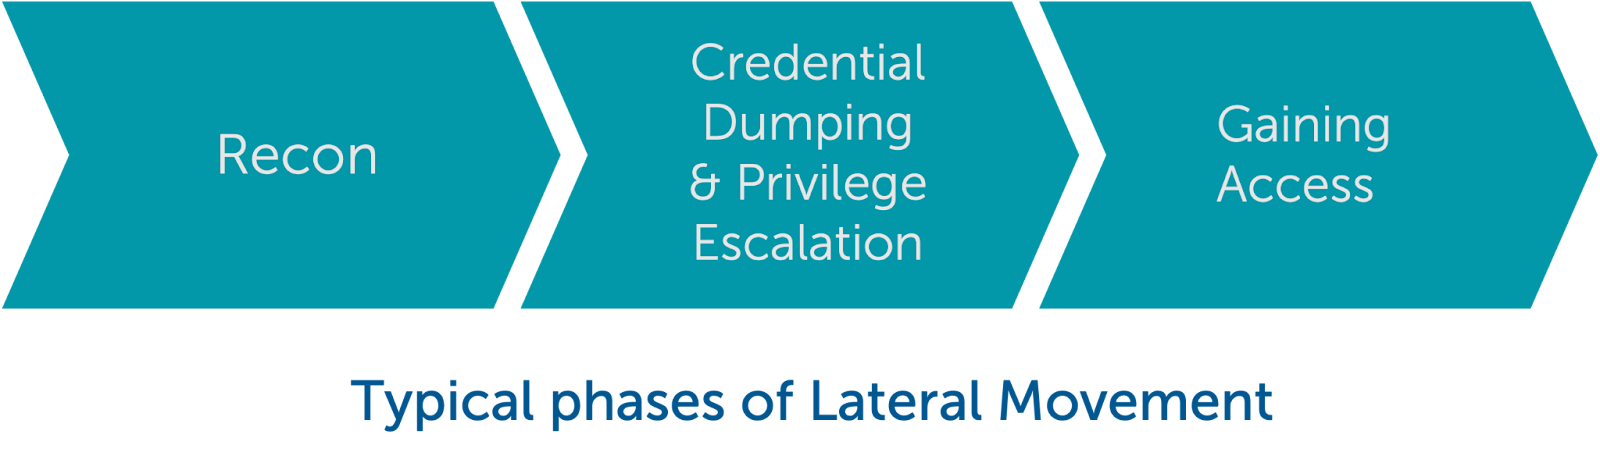 Typical phases of lateral movement - recon, credential dumping and privilege escalation, and gaining access